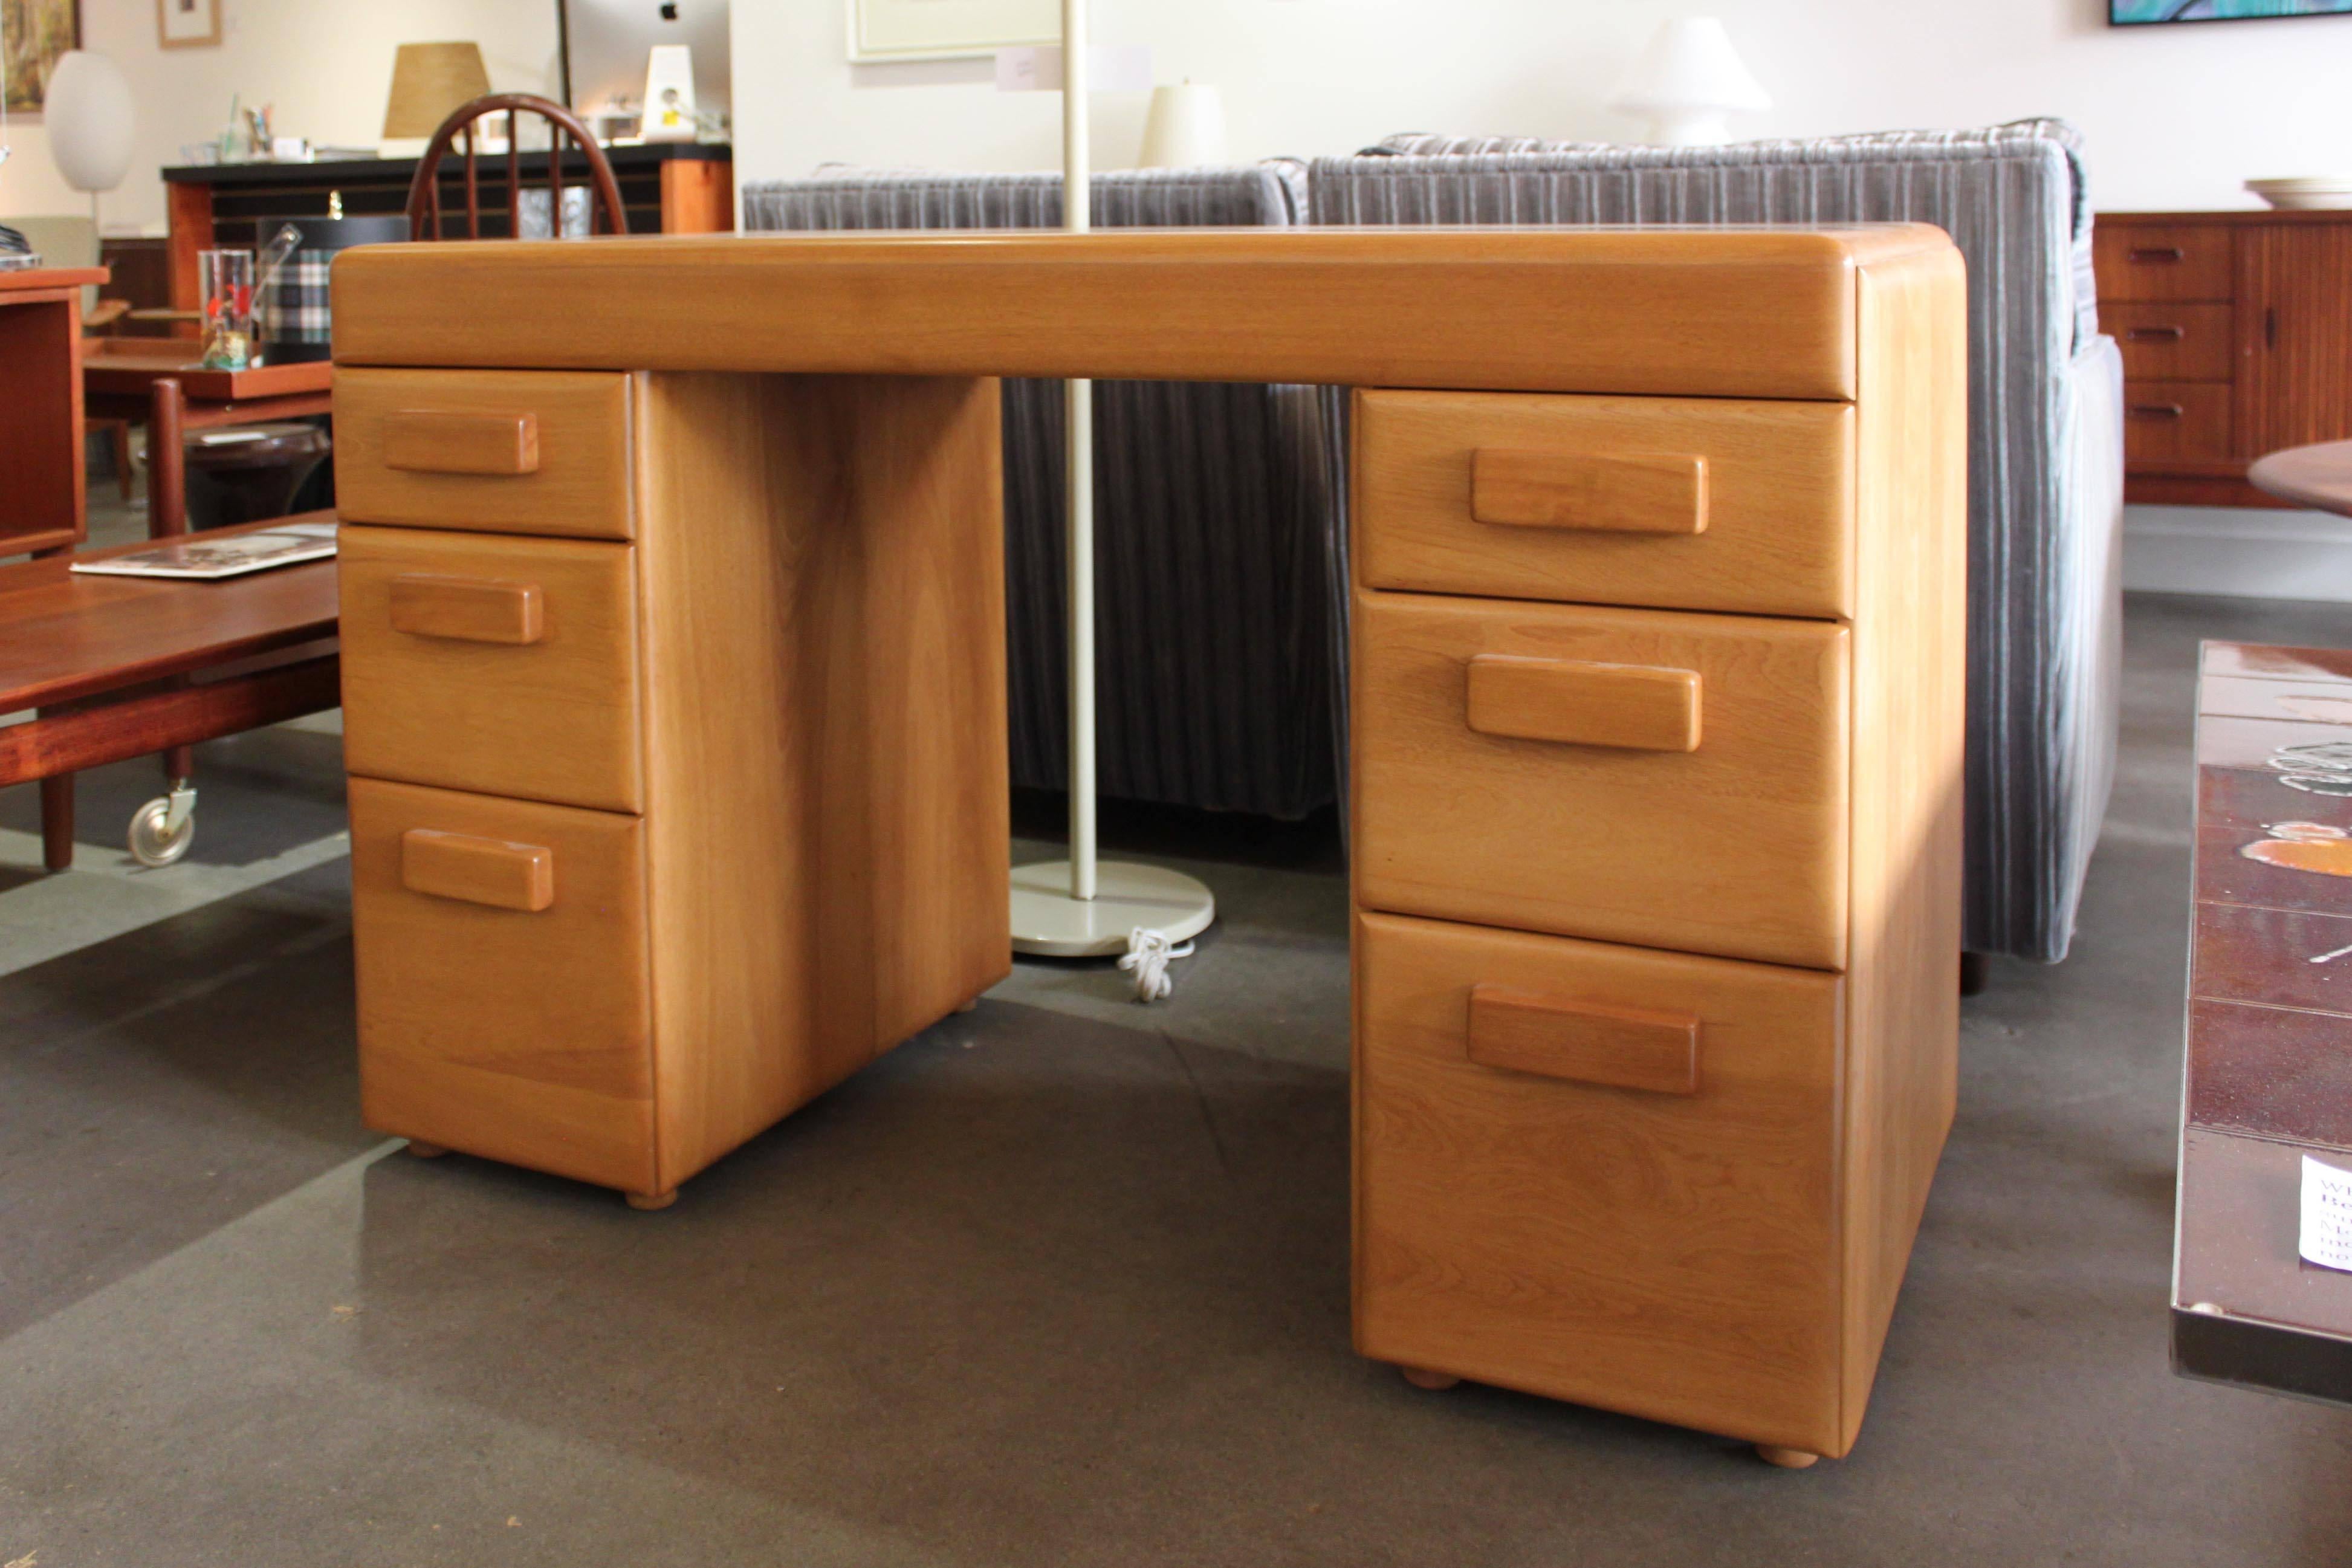 A desk made of made of solid birch by Russel Wright for the Snyder Brothers. Blending the Art Deco and Mid-Century styles, this piece was recently refinished and is in very good vintage condition. Please note the small area of discoloration on the